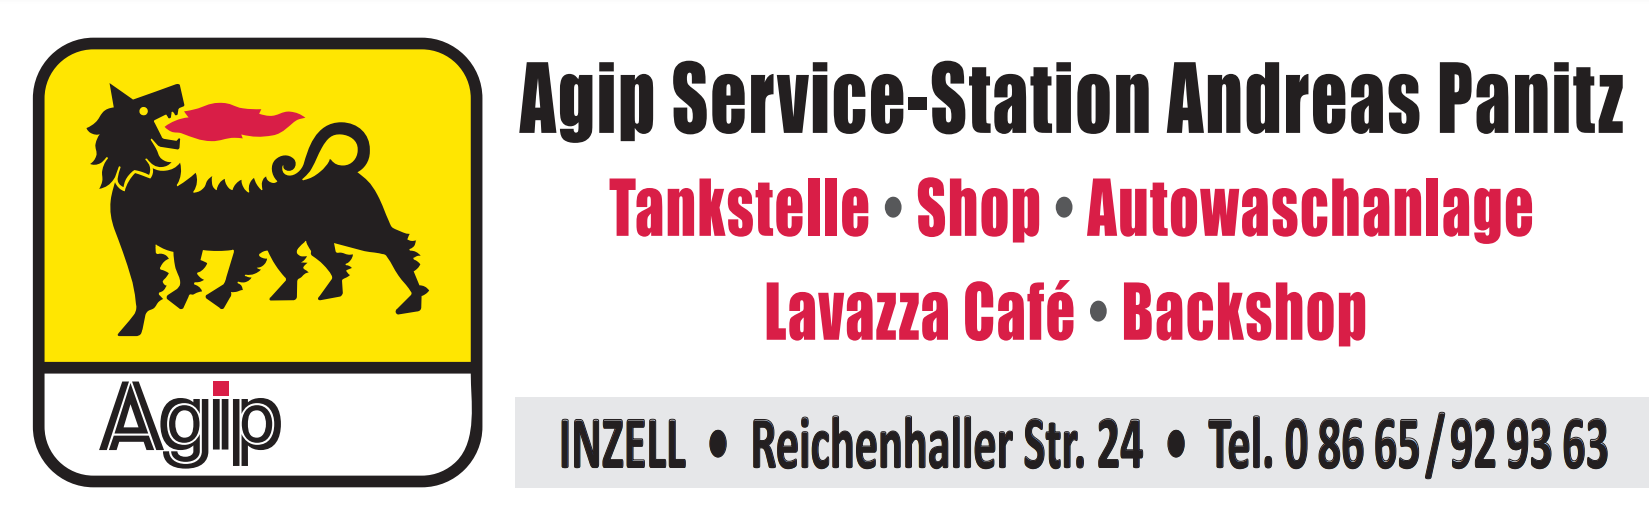 Sponsor AGIP Service Station Inzell